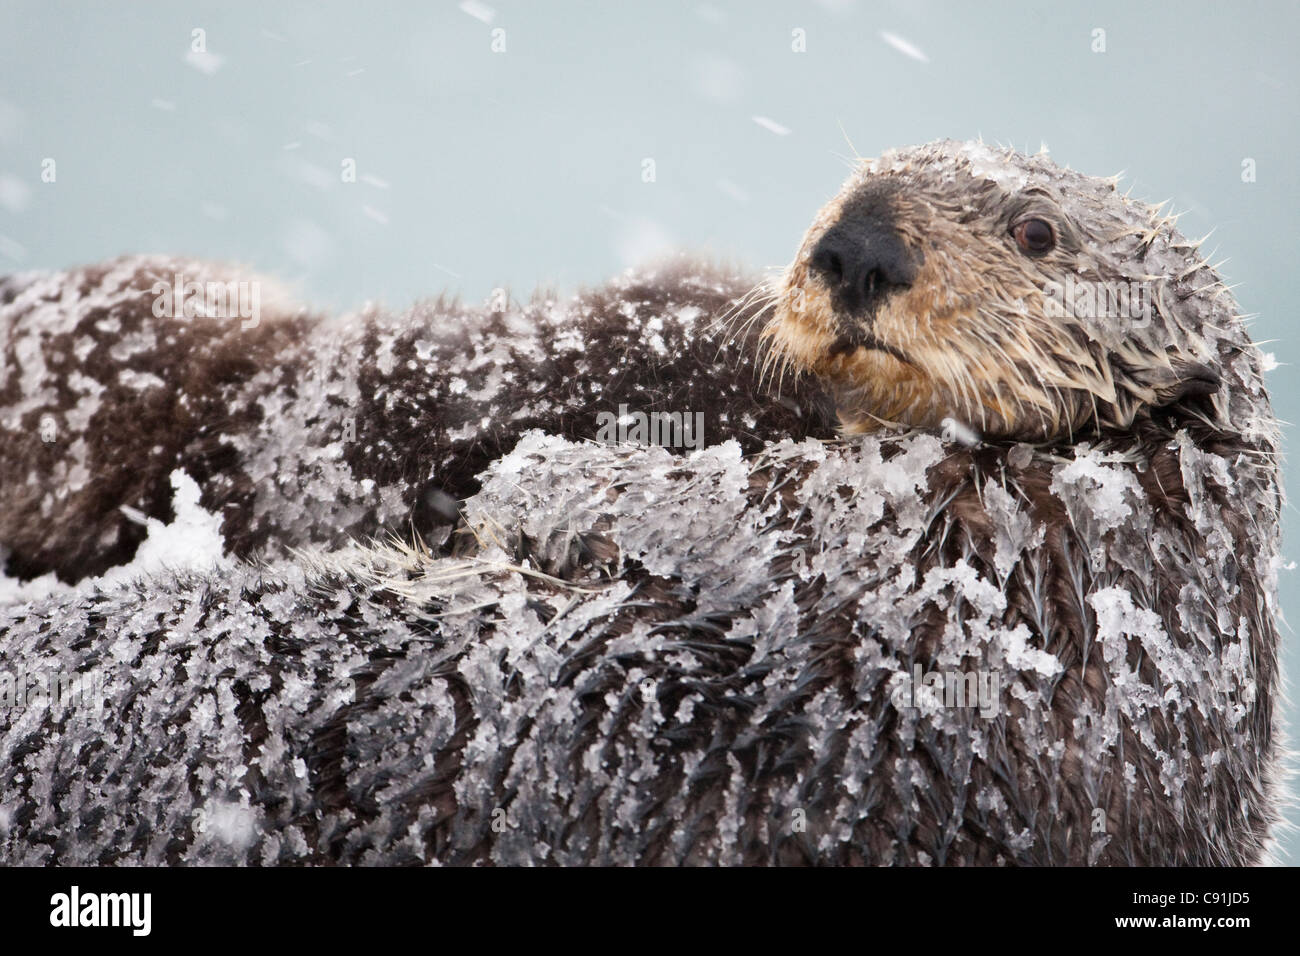 Sea otter with snow covering fur holding newborn pup during blizzard, Prince William Sound, Southcentral Alaska, Winter Stock Photo